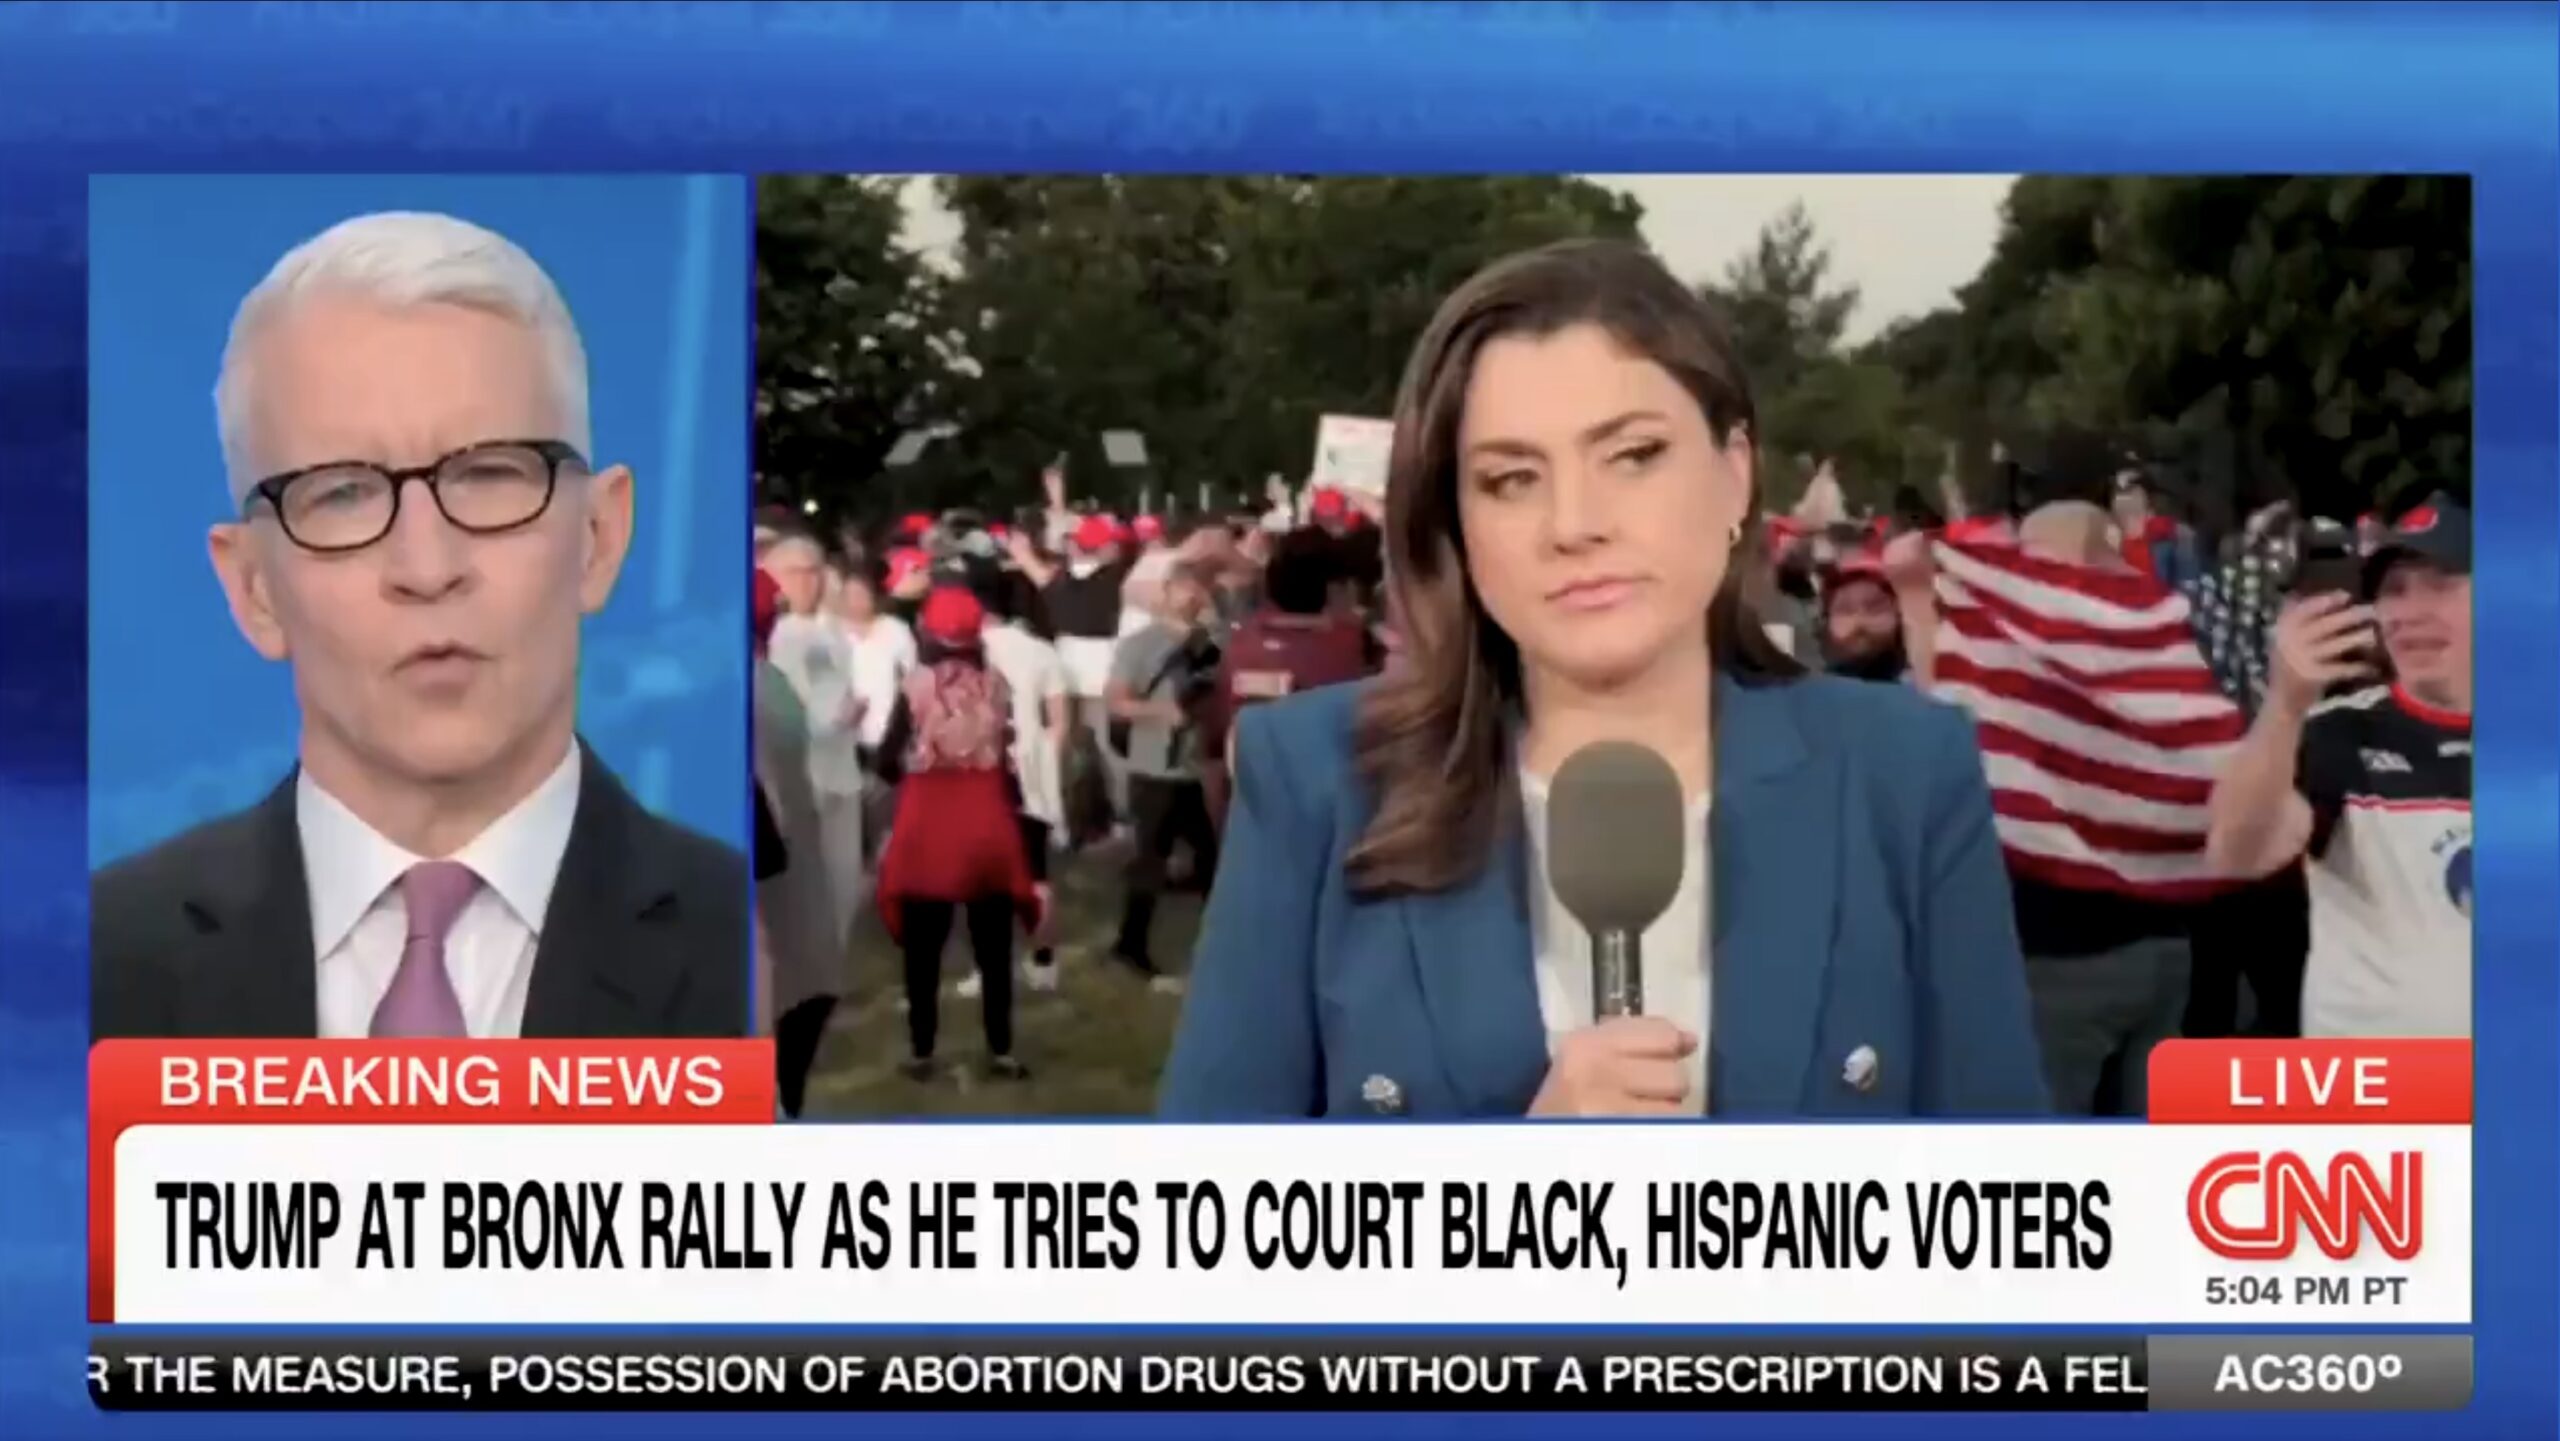 CNN reporter admits the truth about Trump's Bronx rally, and it's not what Democrats want to see |  The Gateway expert